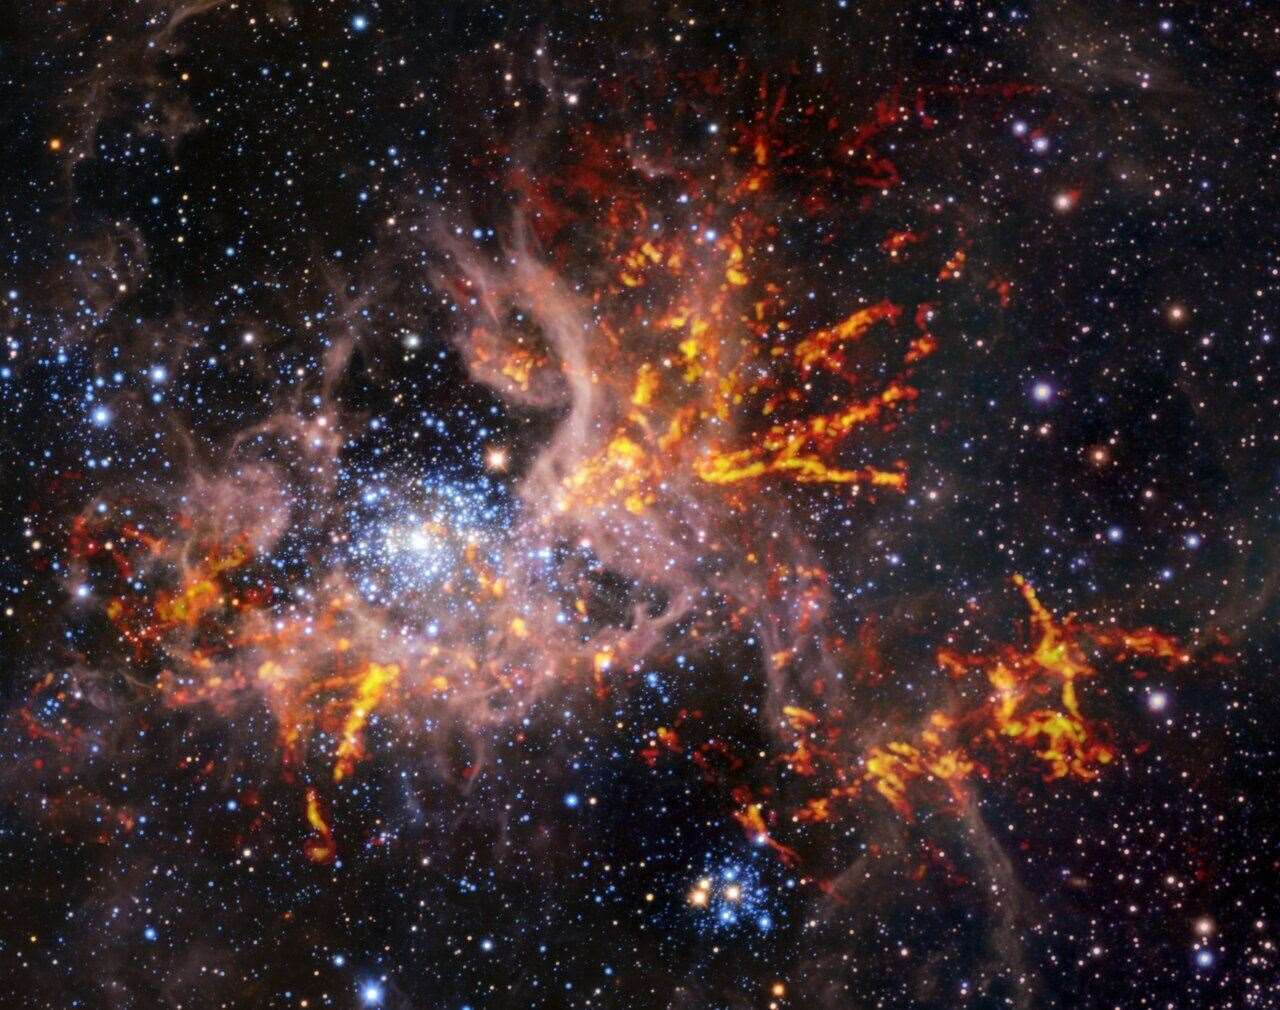 The star-forming region 30 Doradus, also known as the Tarantula Nebula (European Southern Observatory/PA)